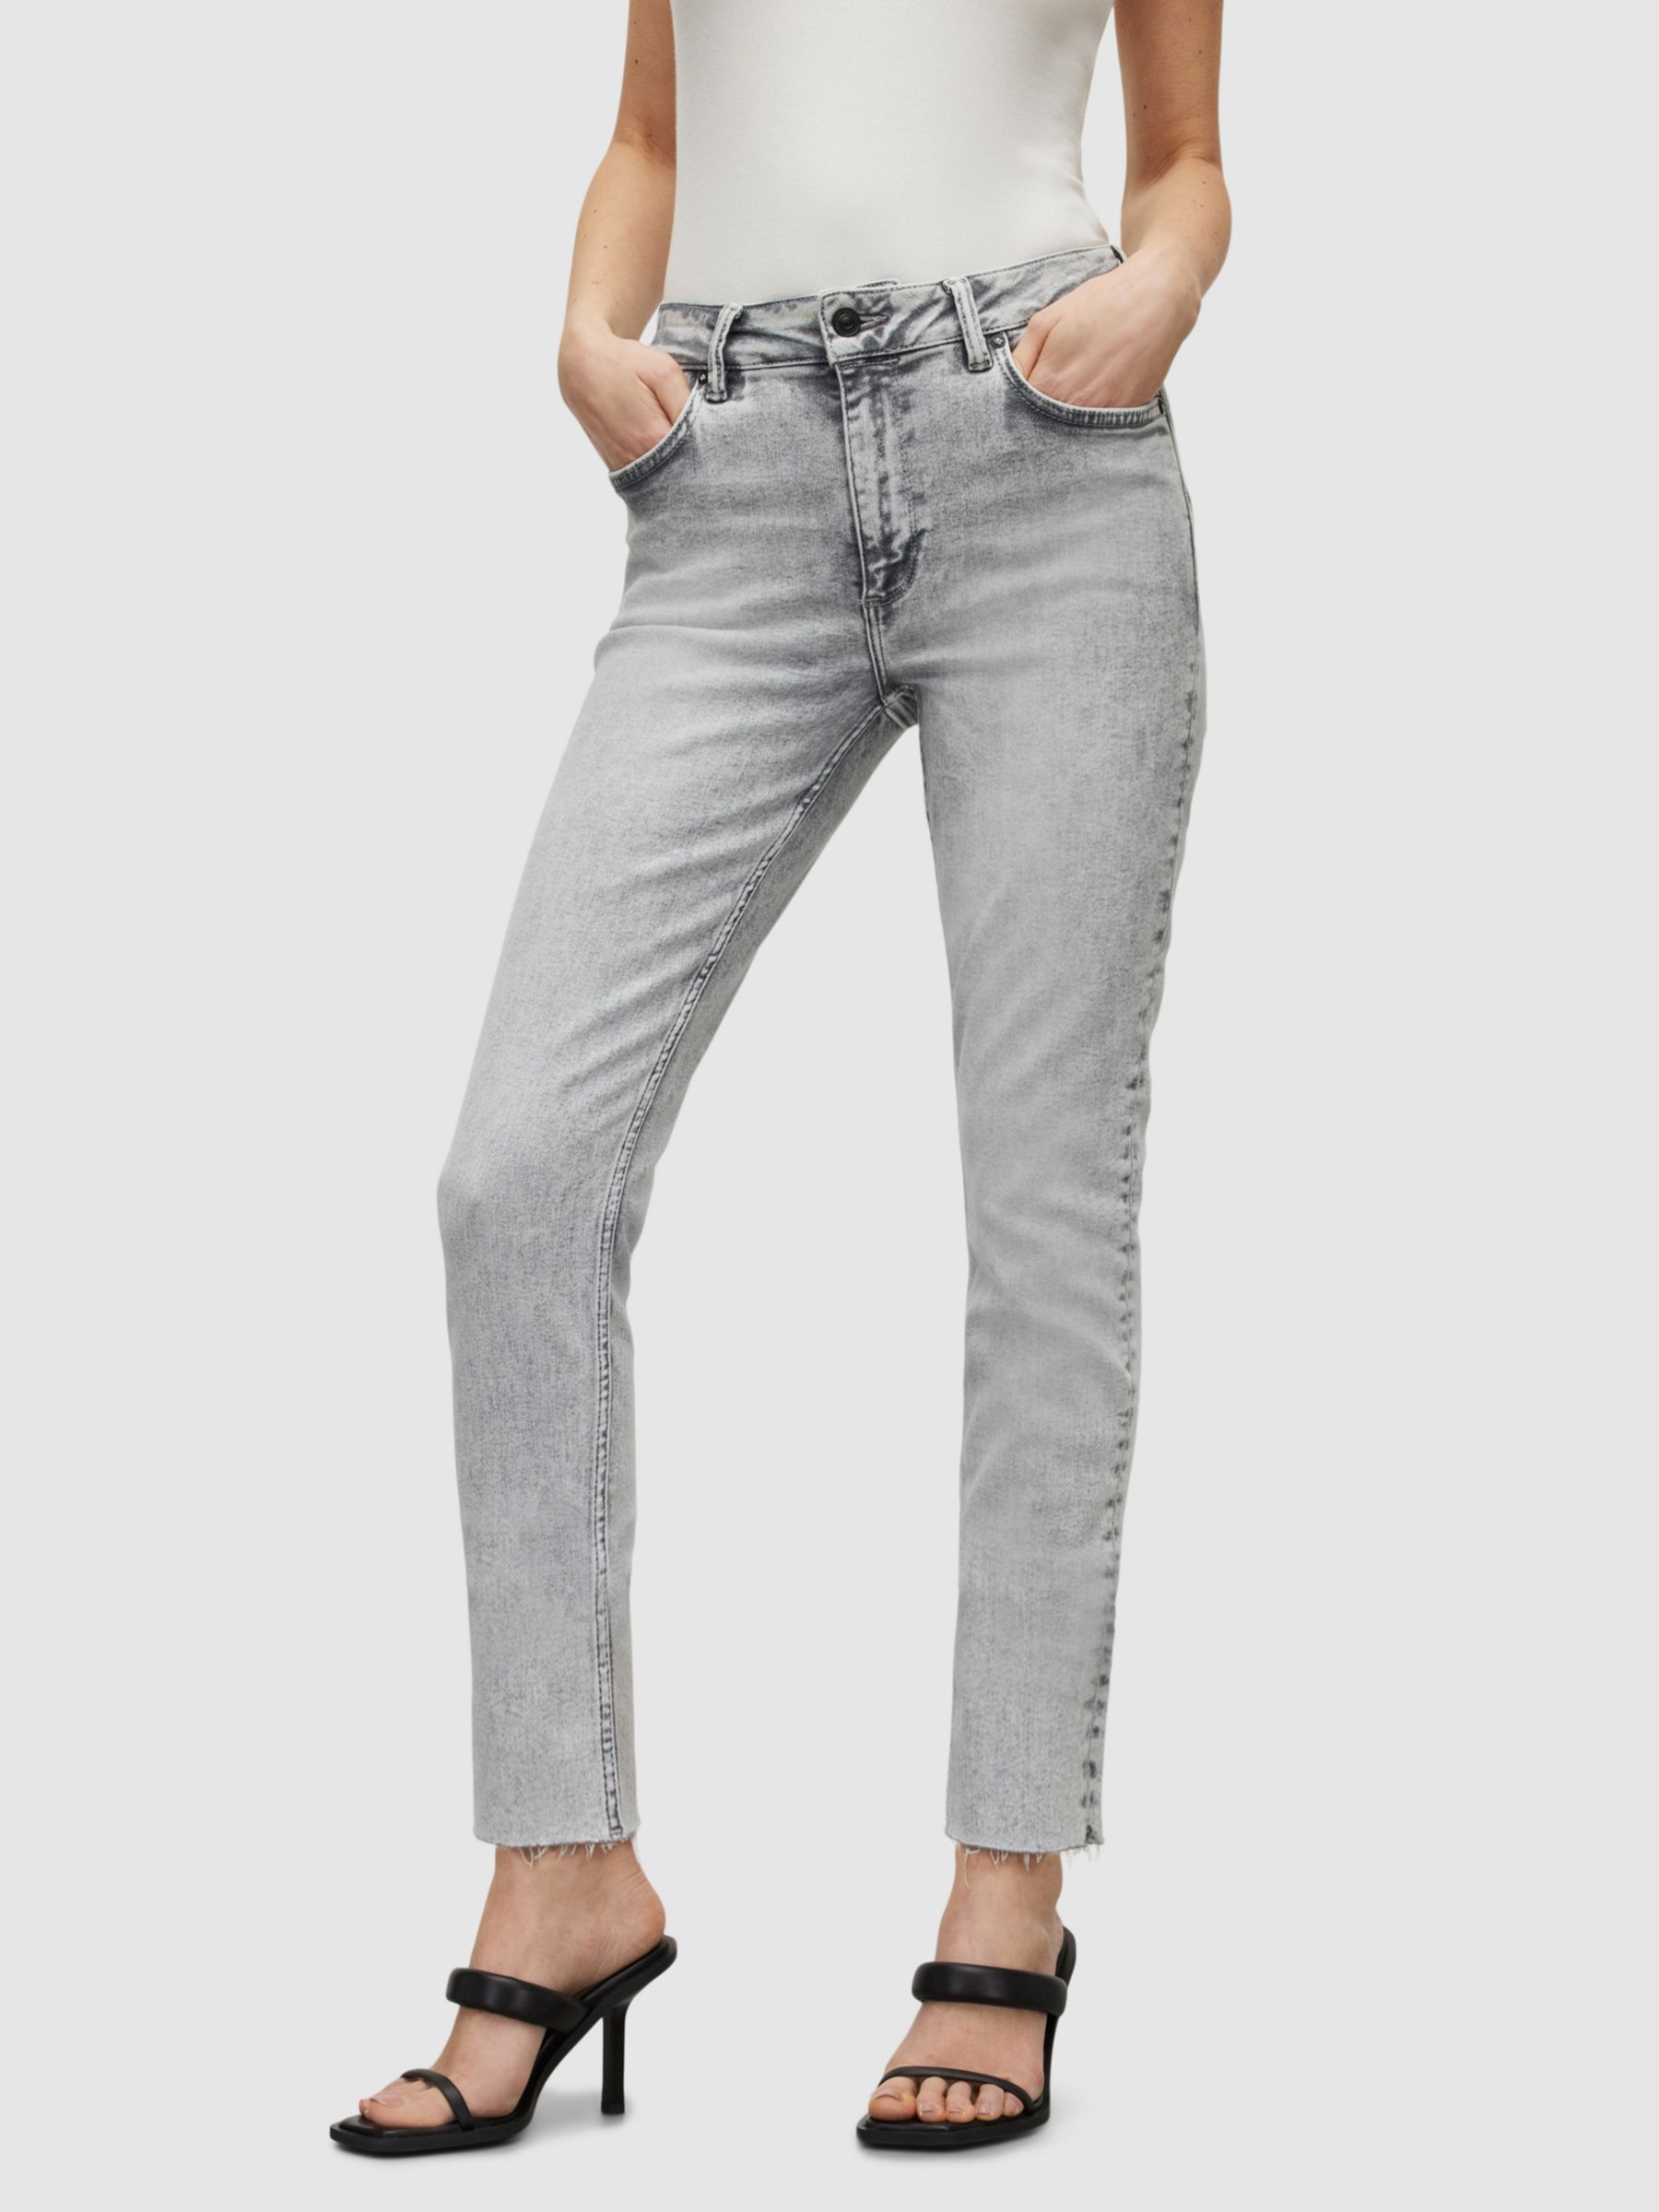 Allsaints Grey Denim Jacket And Women's Skinny Jeans Outfit - Your